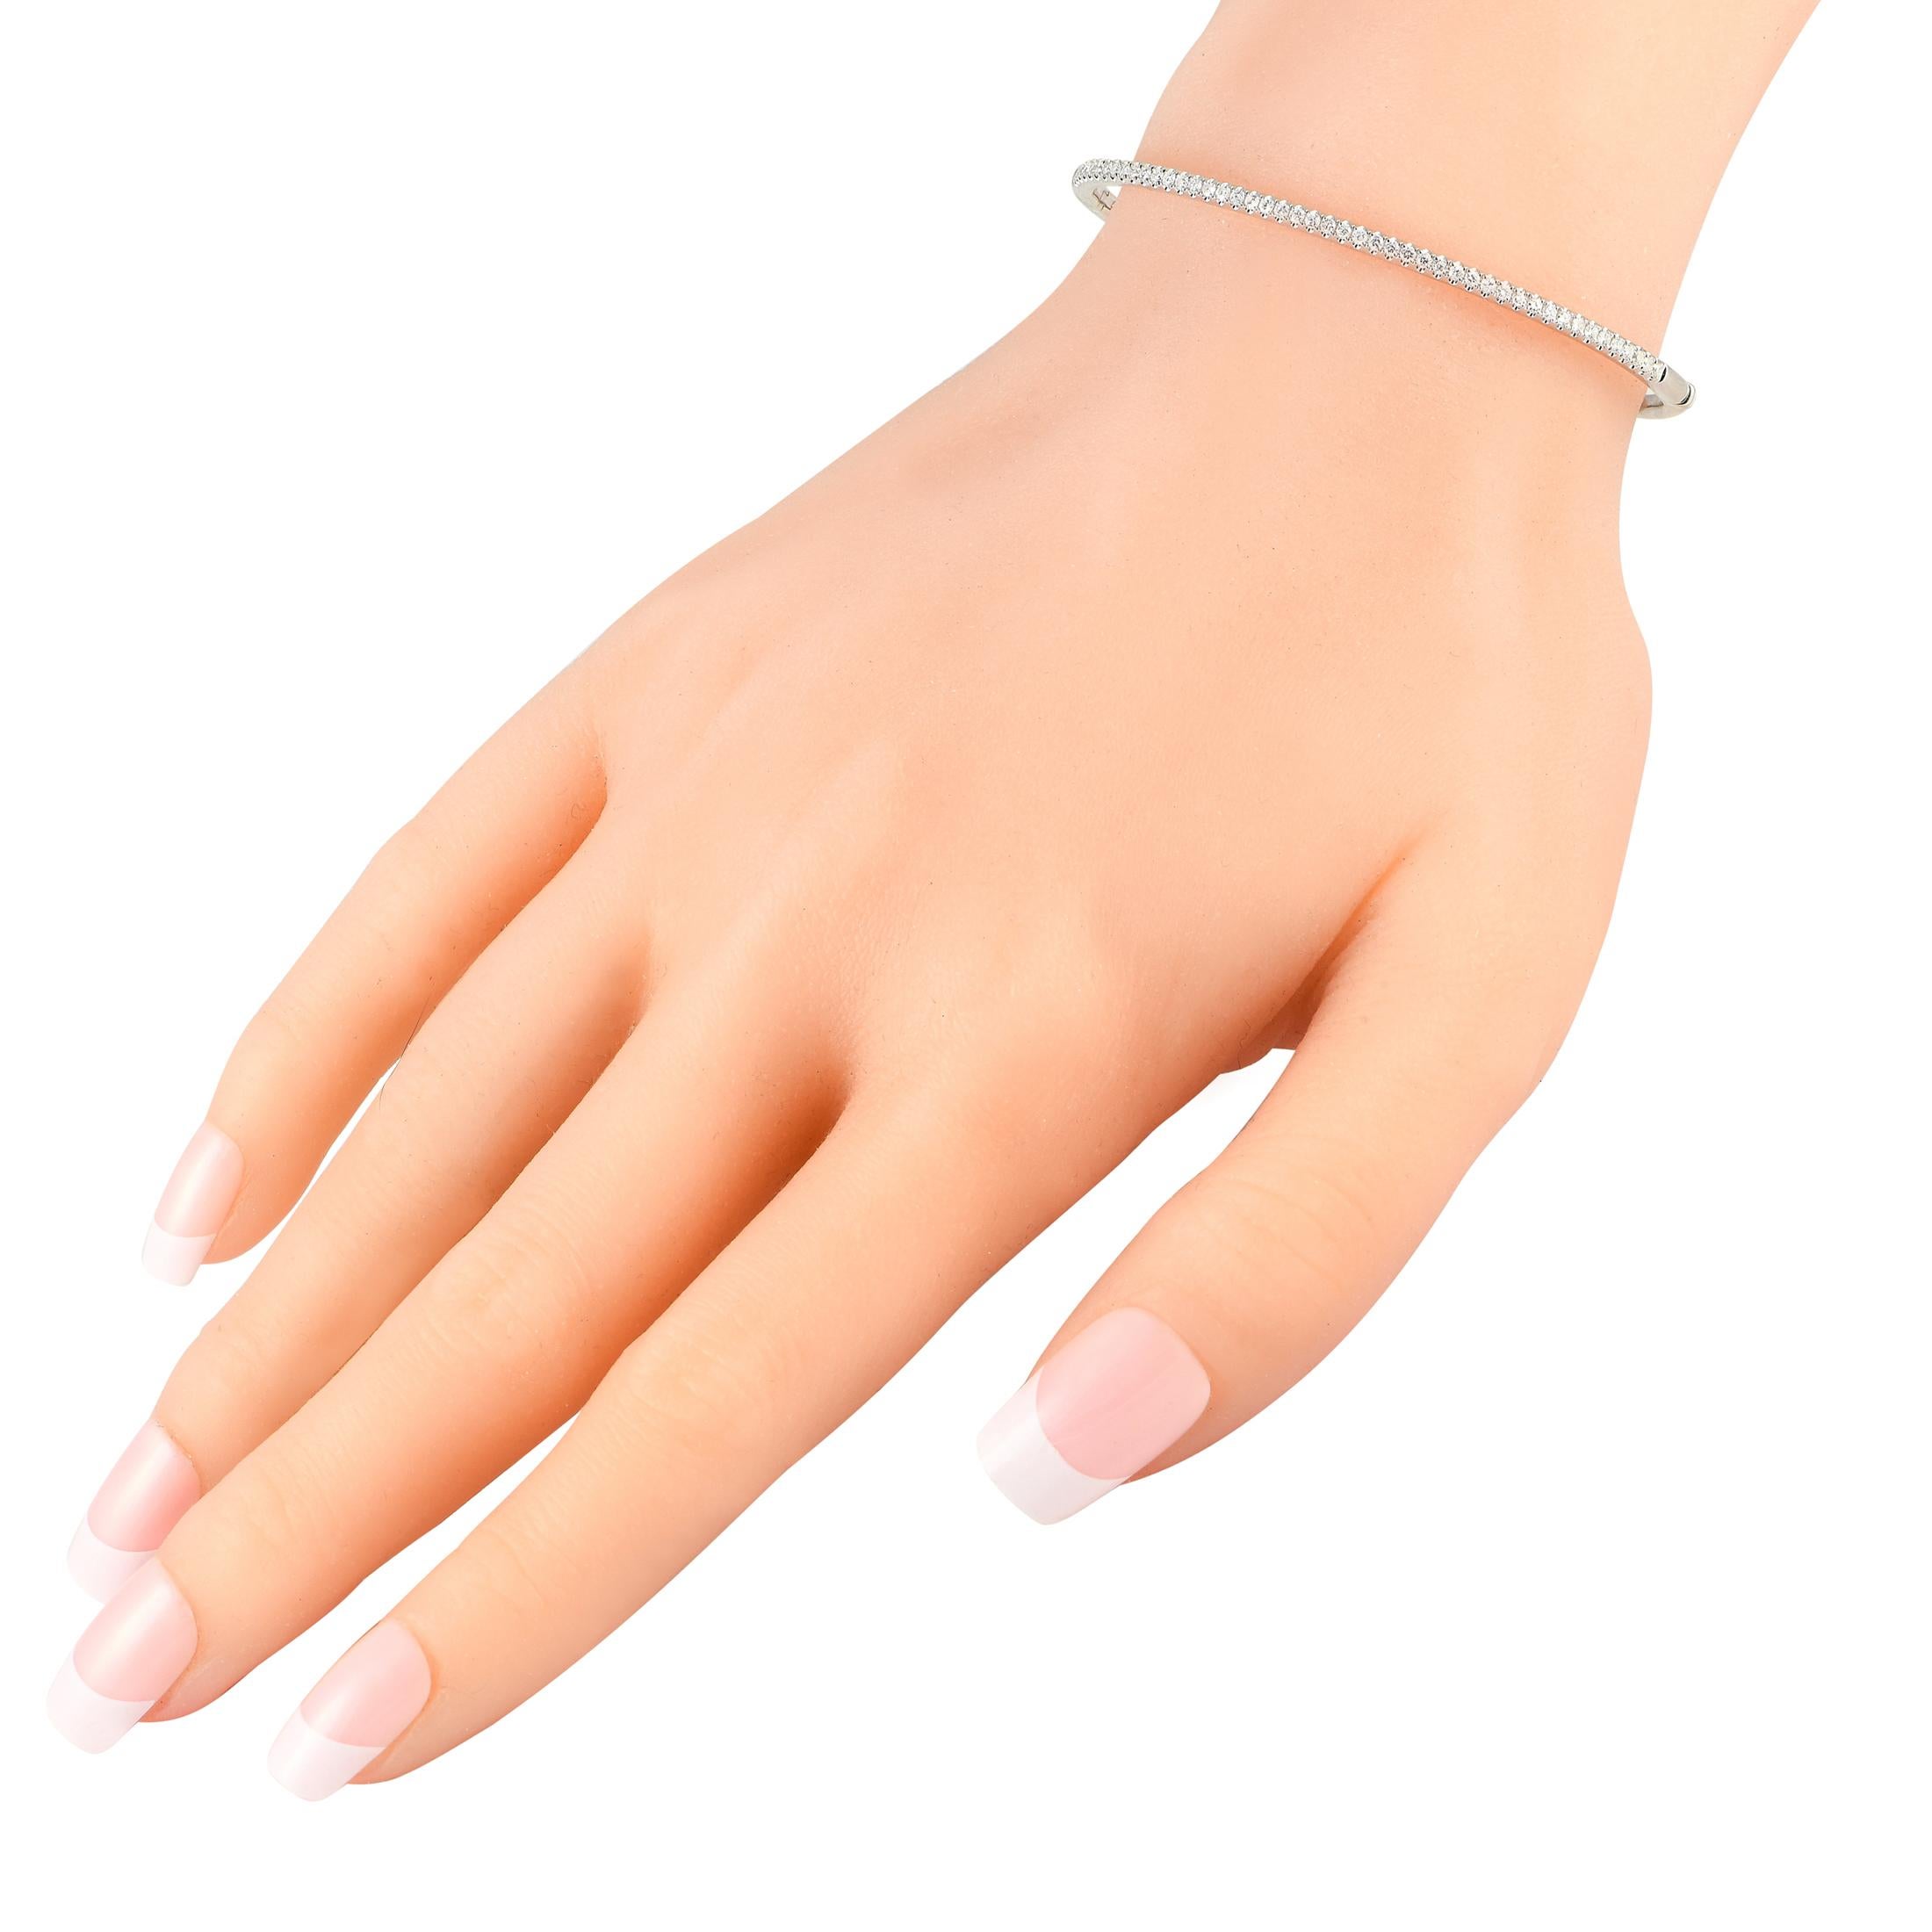 With a slim silhouette and understated sparkle, you can wear this bracelet with anything and everything for an effortlessly chic look. The sleek and slender bangle in solid 18K white gold has petite round diamonds running along half of its